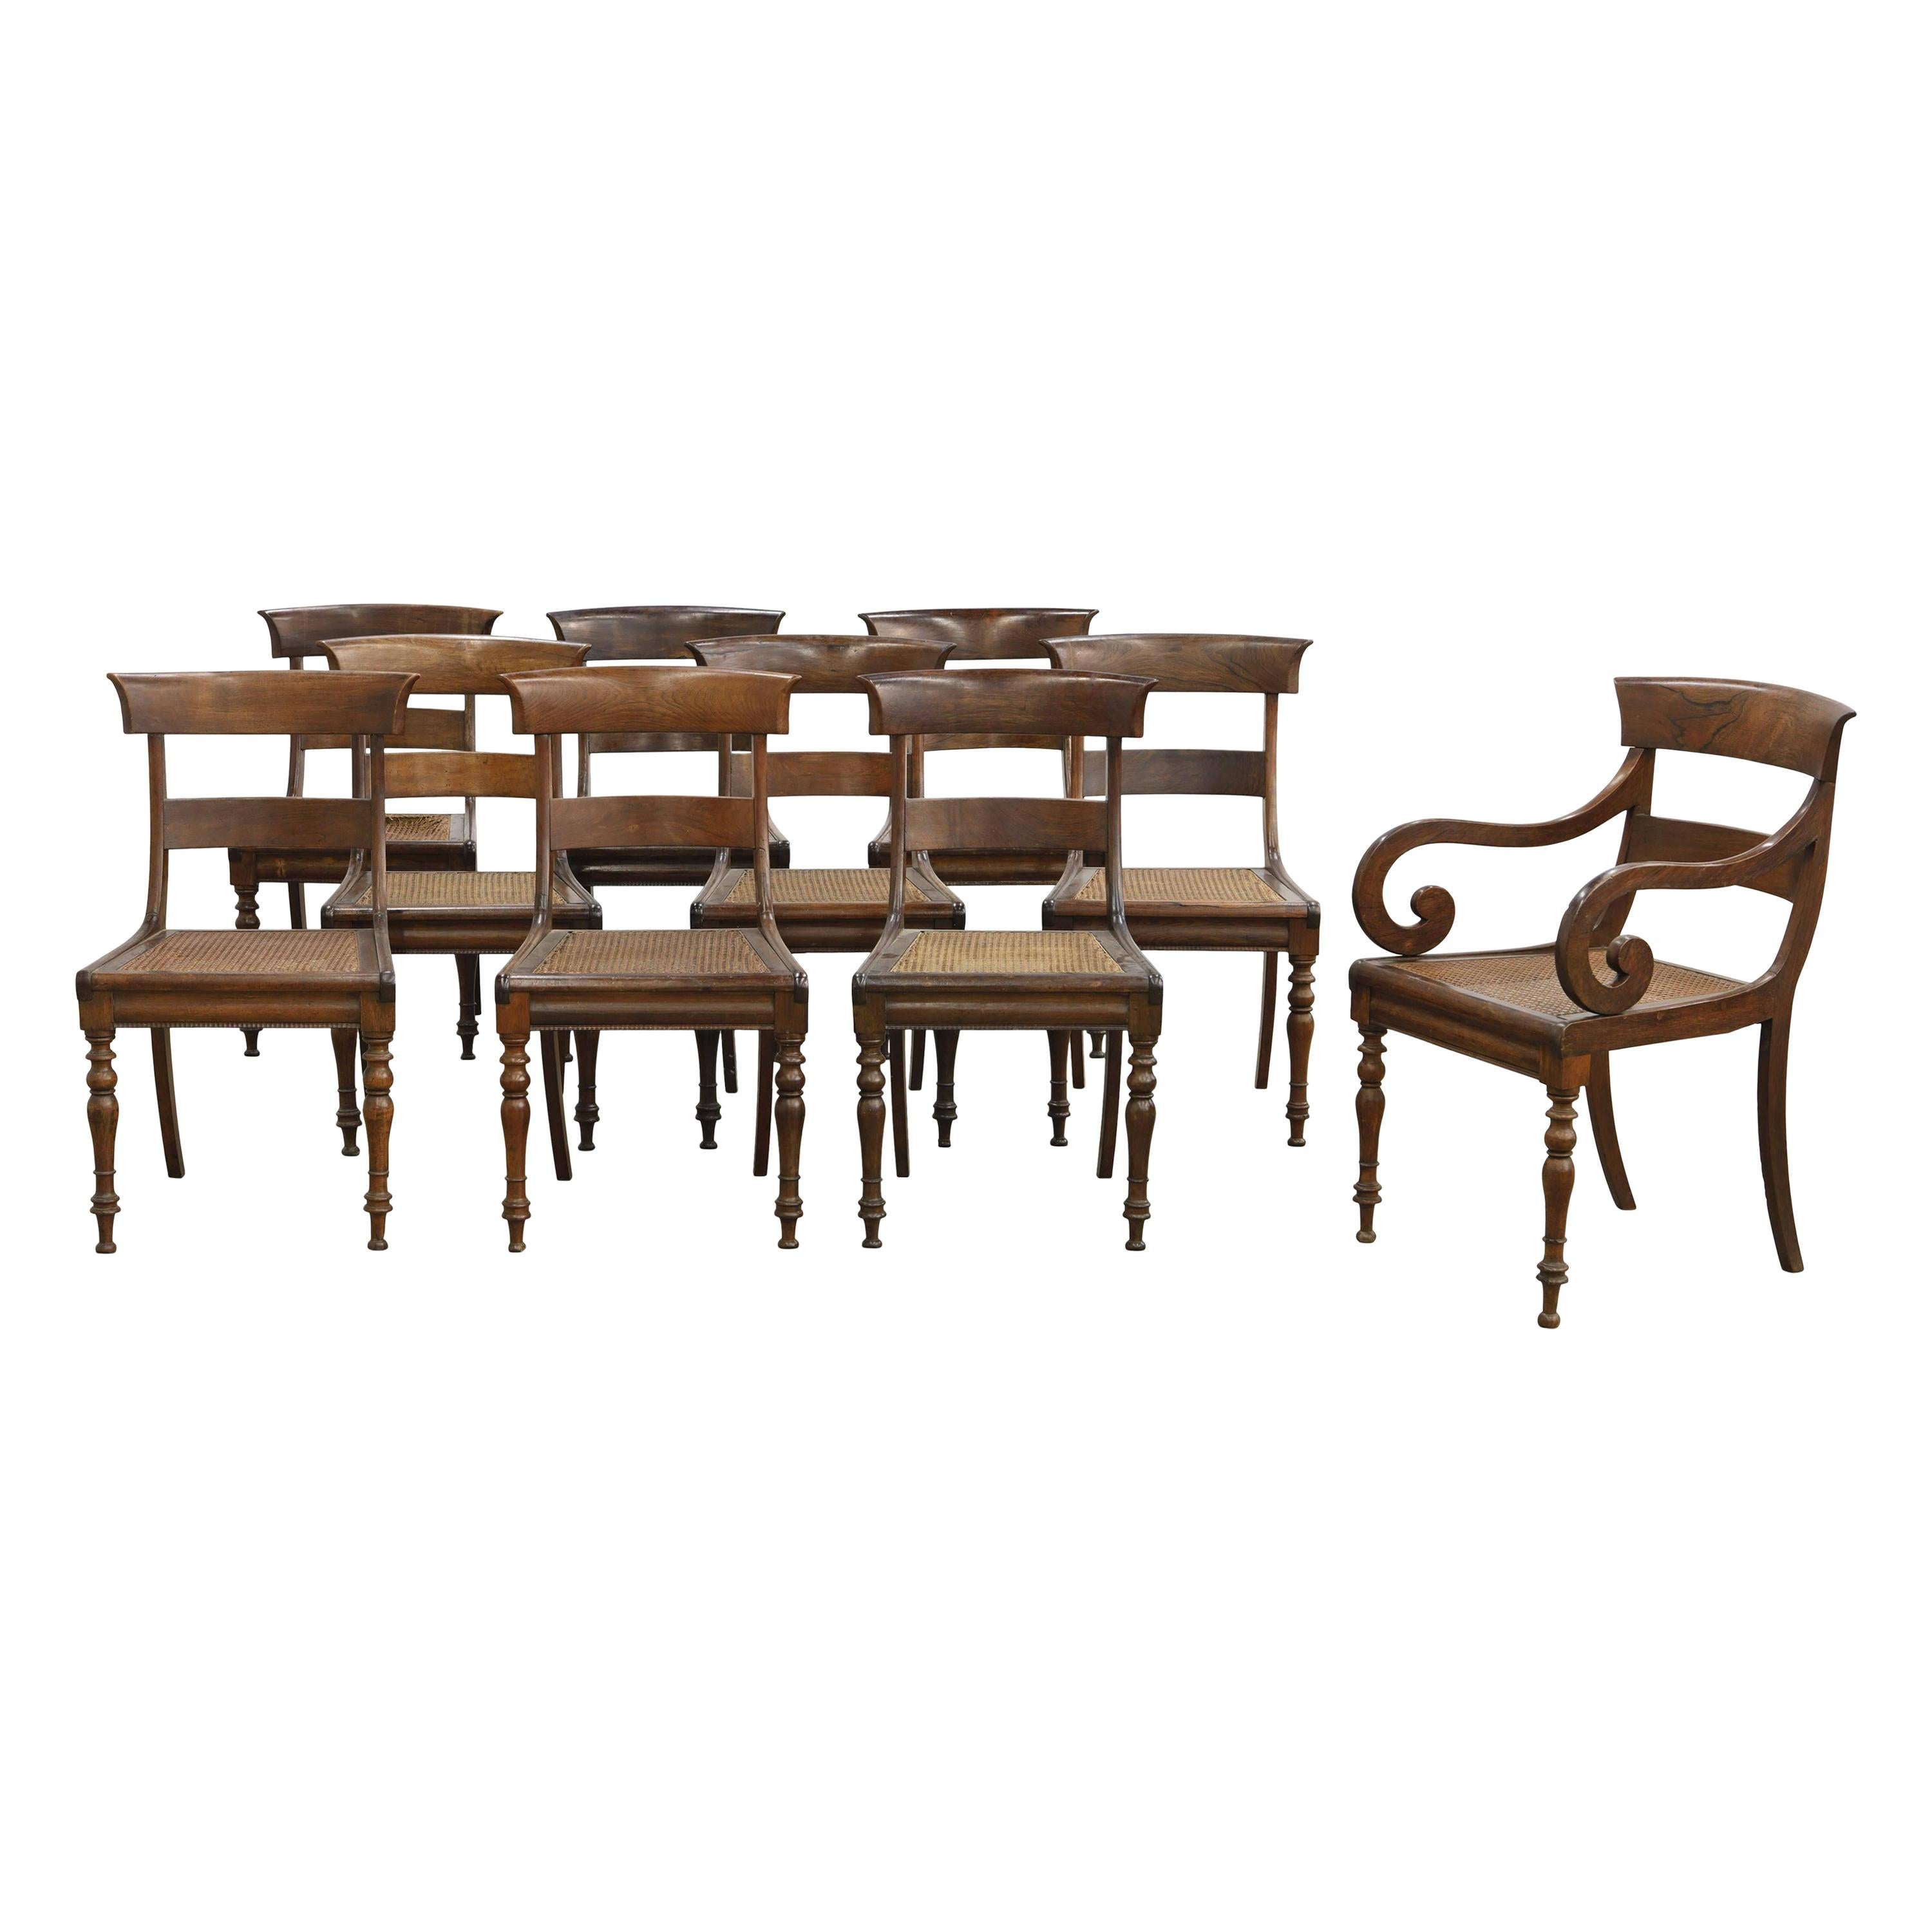 Set of Ten 19th Century Anglo Colonial Rosewood Regency Dining Chairs